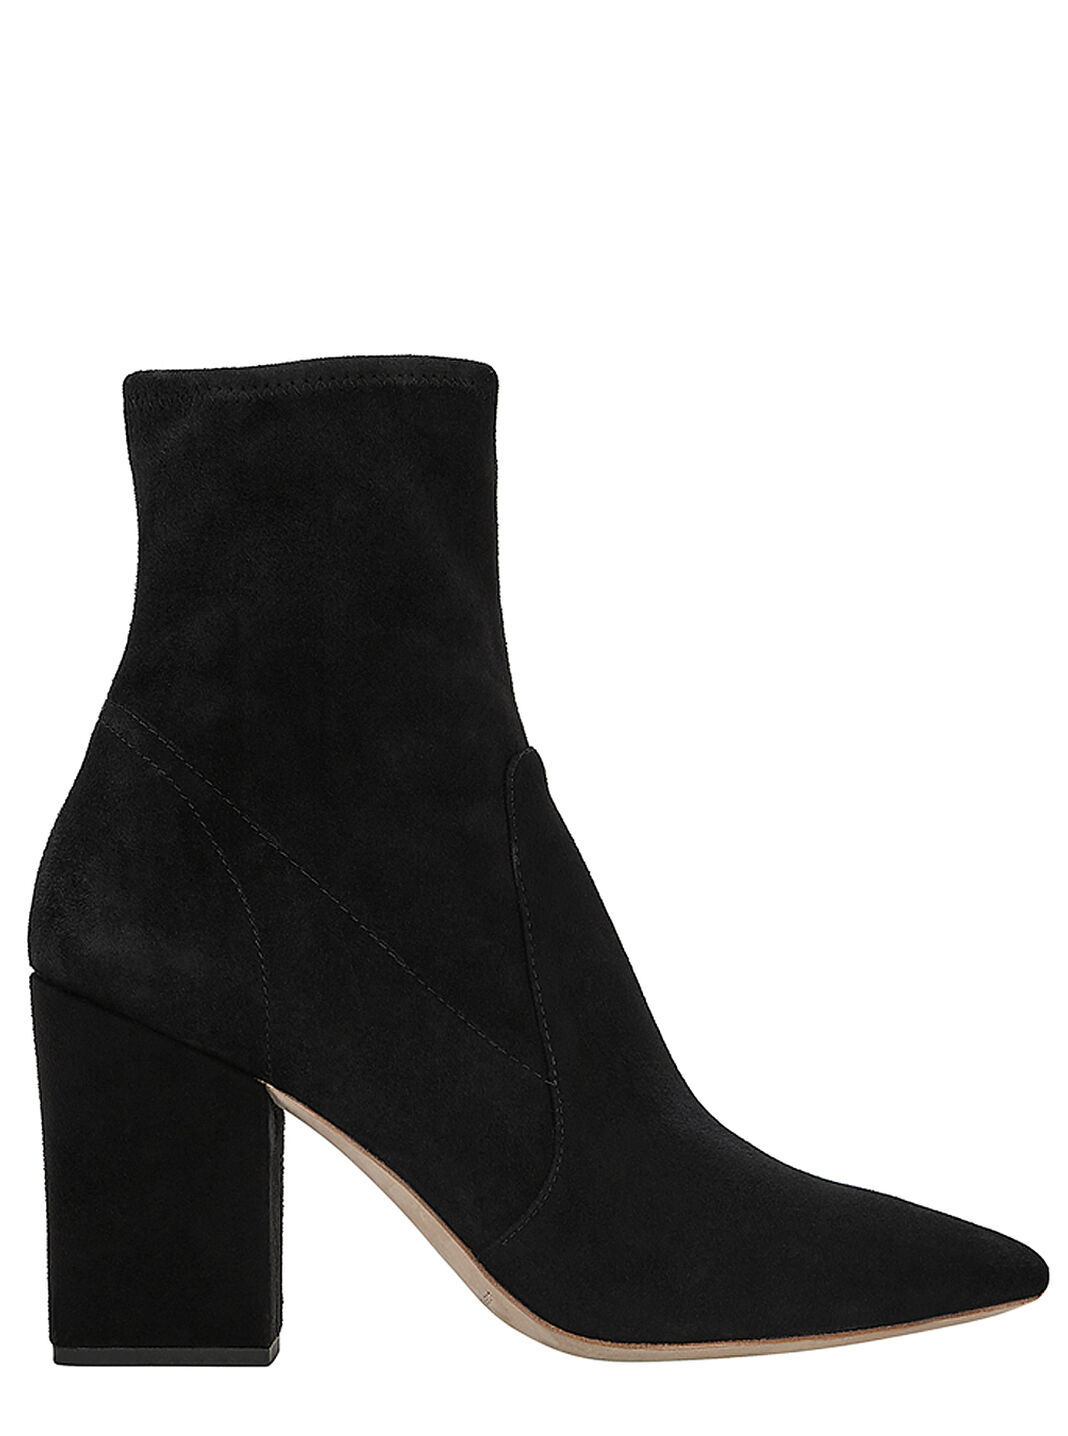 Isla Suede Ankle Booties